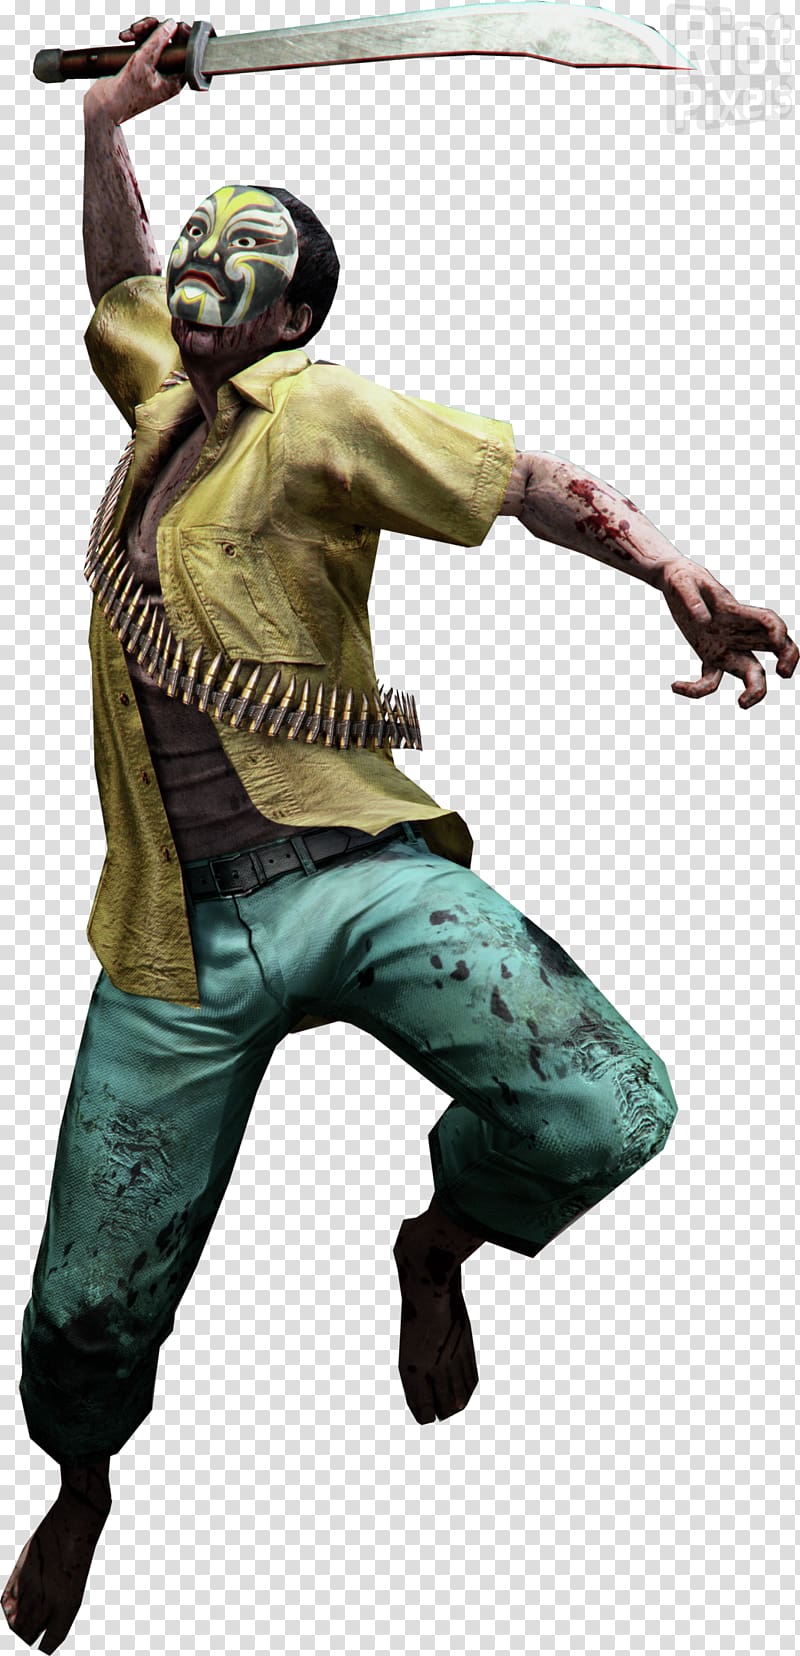 Resident Evil 6 Ada Wong Leon S. Kennedy Xbox 360, zombie transparent background PNG clipart